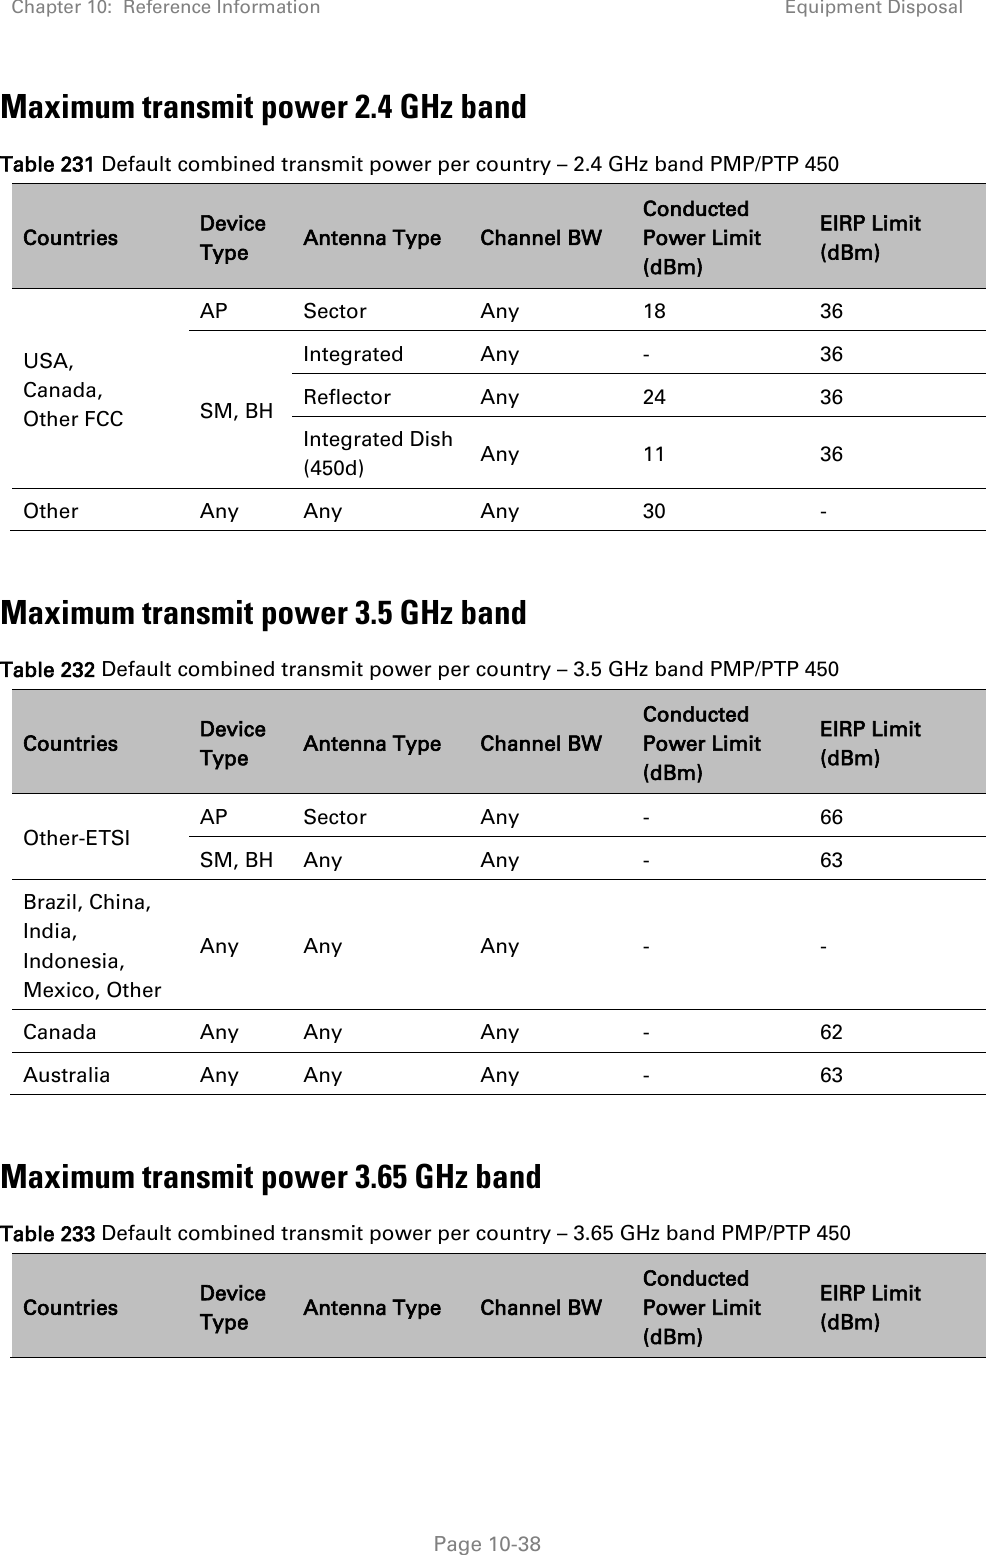 Chapter 10:  Reference Information Equipment Disposal   Page 10-38 Maximum transmit power 2.4 GHz band Table 231 Default combined transmit power per country – 2.4 GHz band PMP/PTP 450 Countries Device Type Antenna Type Channel BW Conducted Power Limit (dBm) EIRP Limit (dBm) USA, Canada, Other FCC AP Sector Any 18 36 SM, BH Integrated Any - 36 Reflector Any 24 36 Integrated Dish (450d) Any 11 36 Other Any Any Any 30 -  Maximum transmit power 3.5 GHz band Table 232 Default combined transmit power per country – 3.5 GHz band PMP/PTP 450 Countries Device Type Antenna Type Channel BW Conducted Power Limit (dBm) EIRP Limit (dBm) Other-ETSI AP Sector Any - 66 SM, BH Any Any - 63 Brazil, China, India, Indonesia, Mexico, Other Any Any Any - - Canada Any Any Any - 62 Australia Any Any Any - 63  Maximum transmit power 3.65 GHz band Table 233 Default combined transmit power per country – 3.65 GHz band PMP/PTP 450 Countries Device Type Antenna Type Channel BW Conducted Power Limit (dBm) EIRP Limit (dBm) 